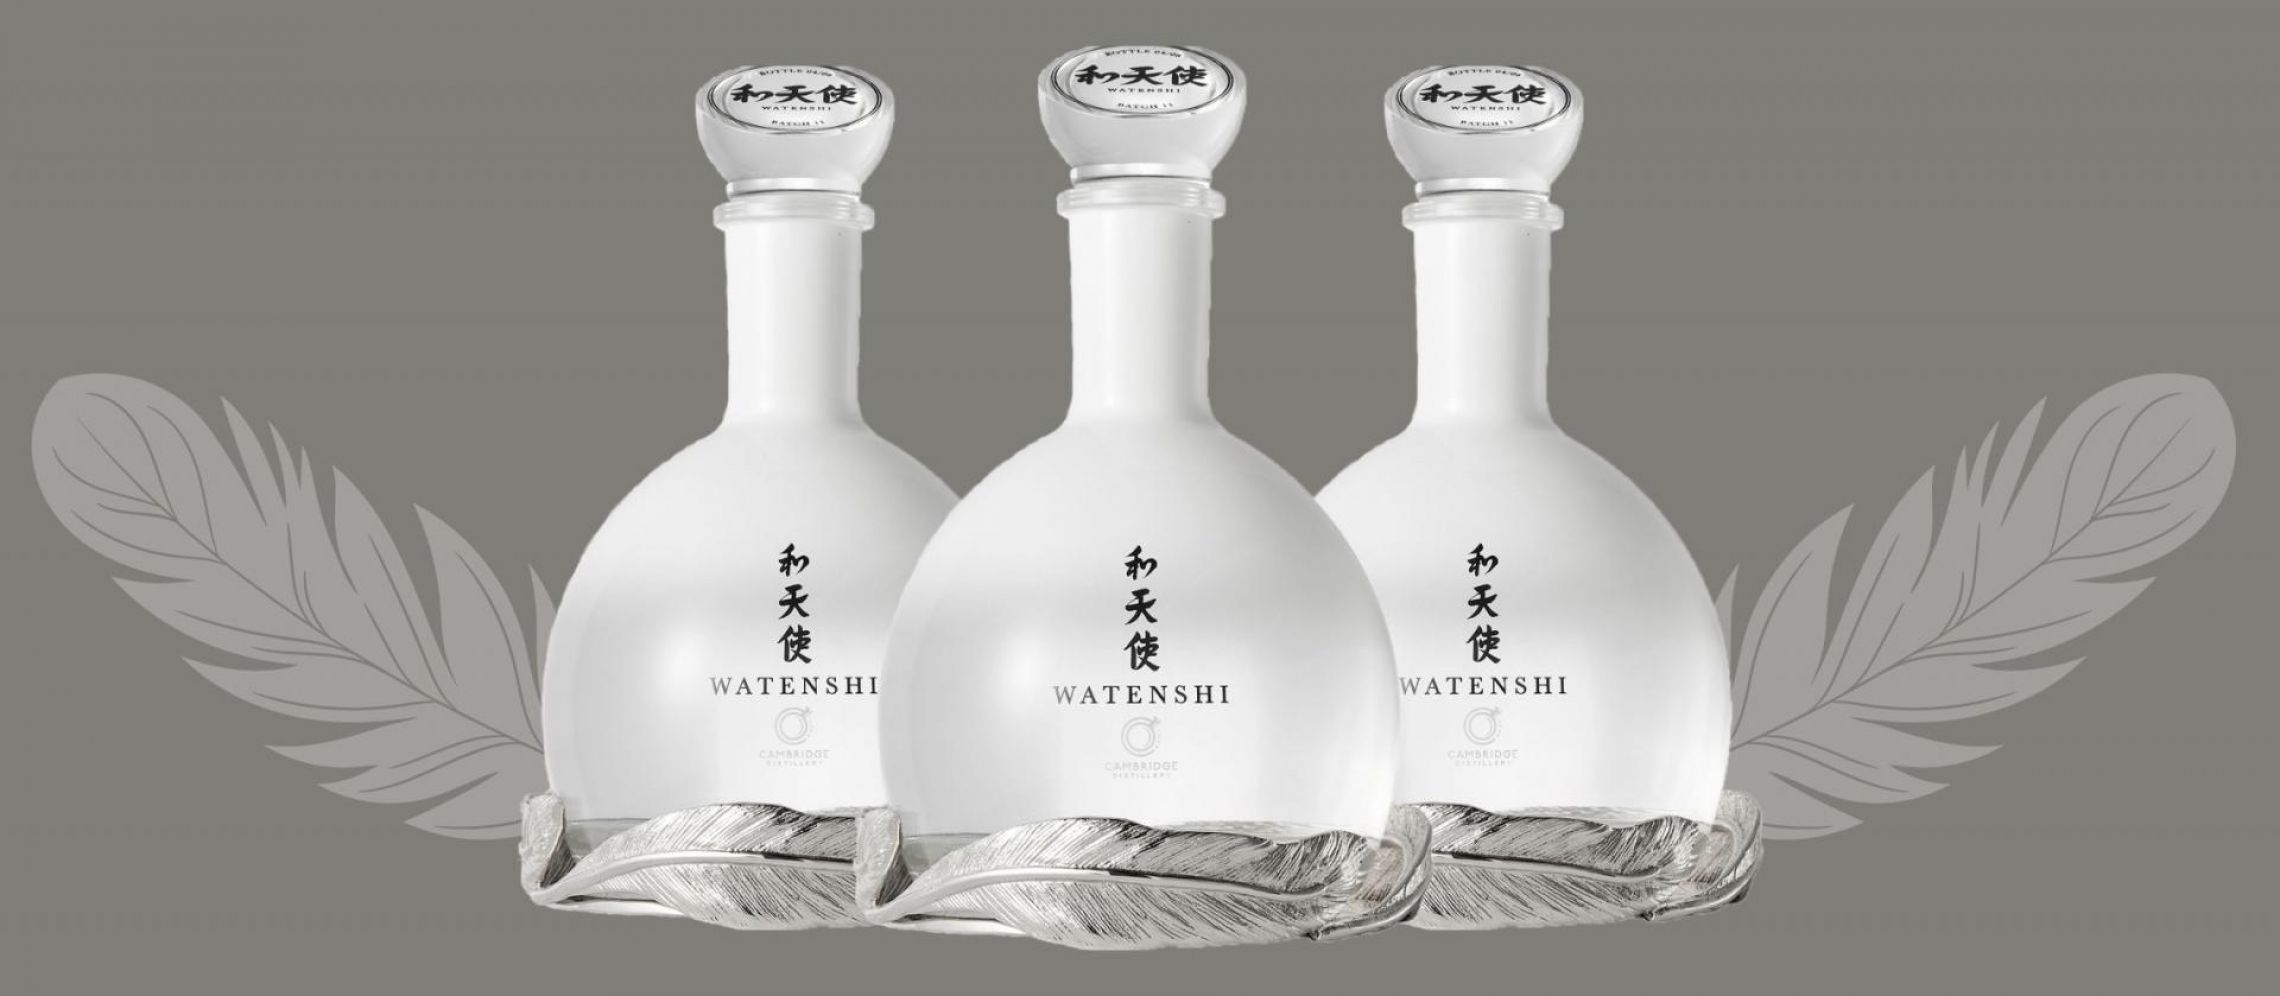 Photo for: The Most Exclusive Gin- Watenshi Gin